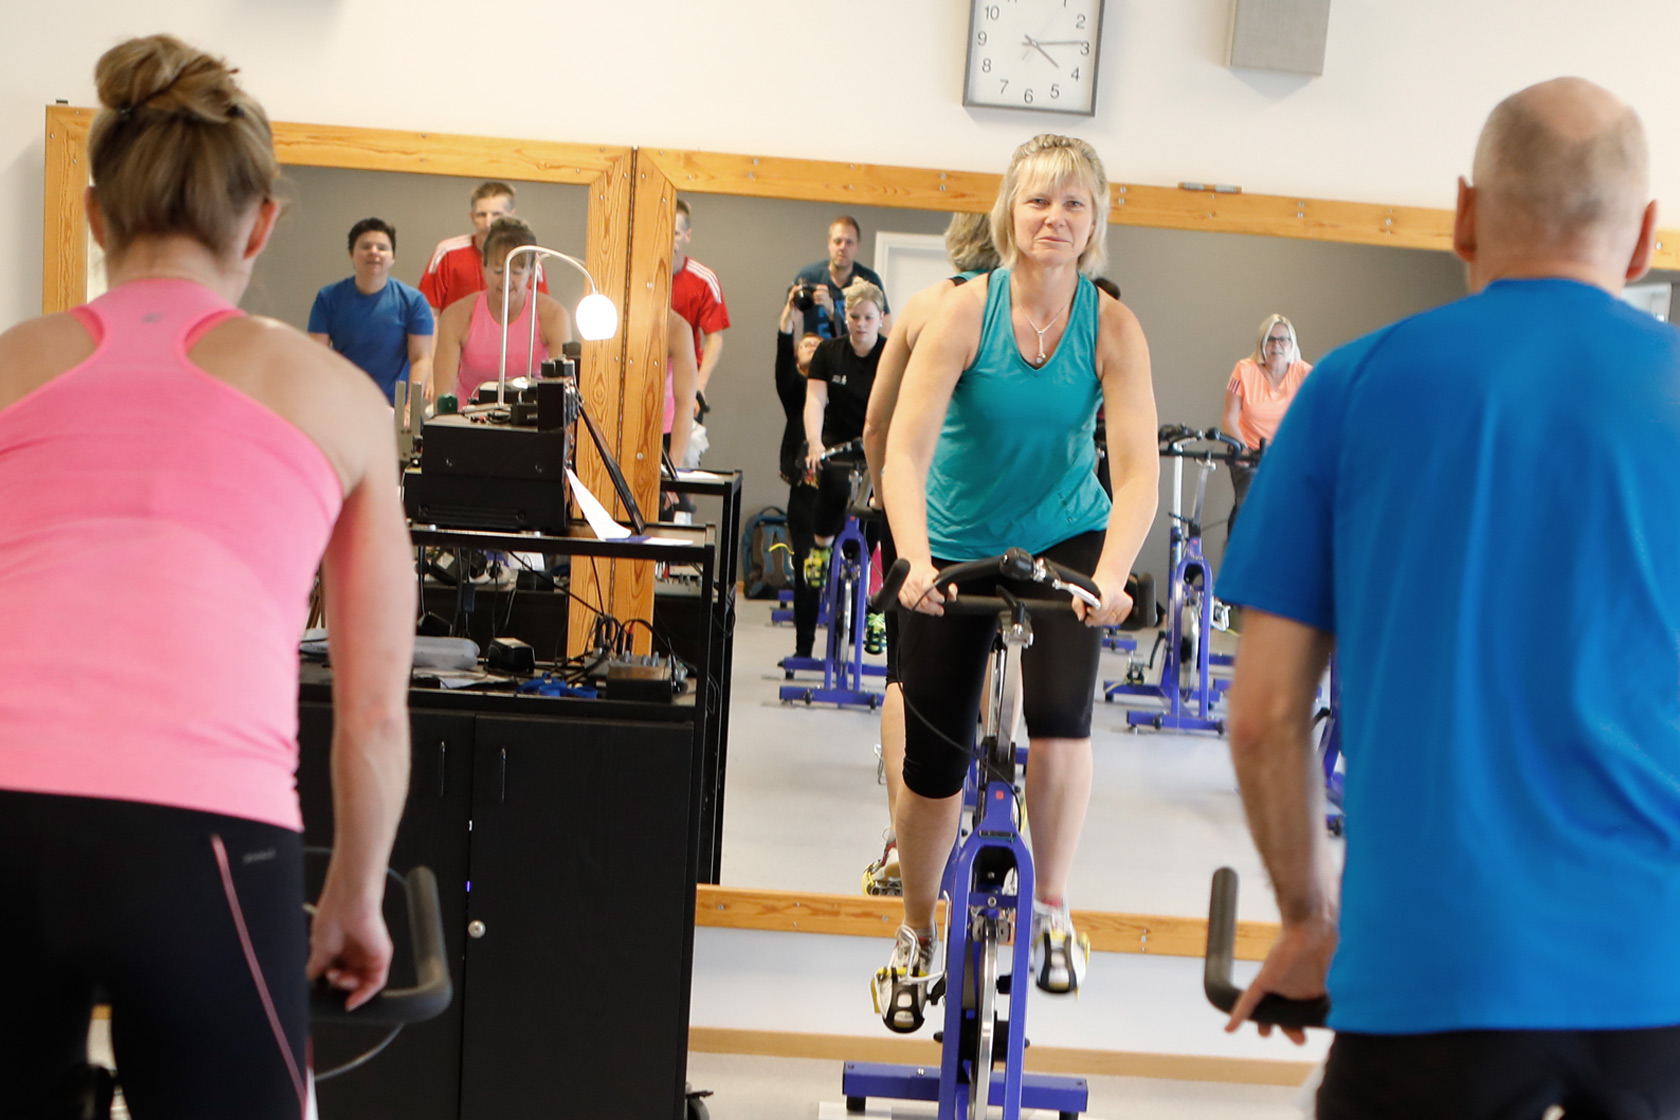 People exercising in a spin class